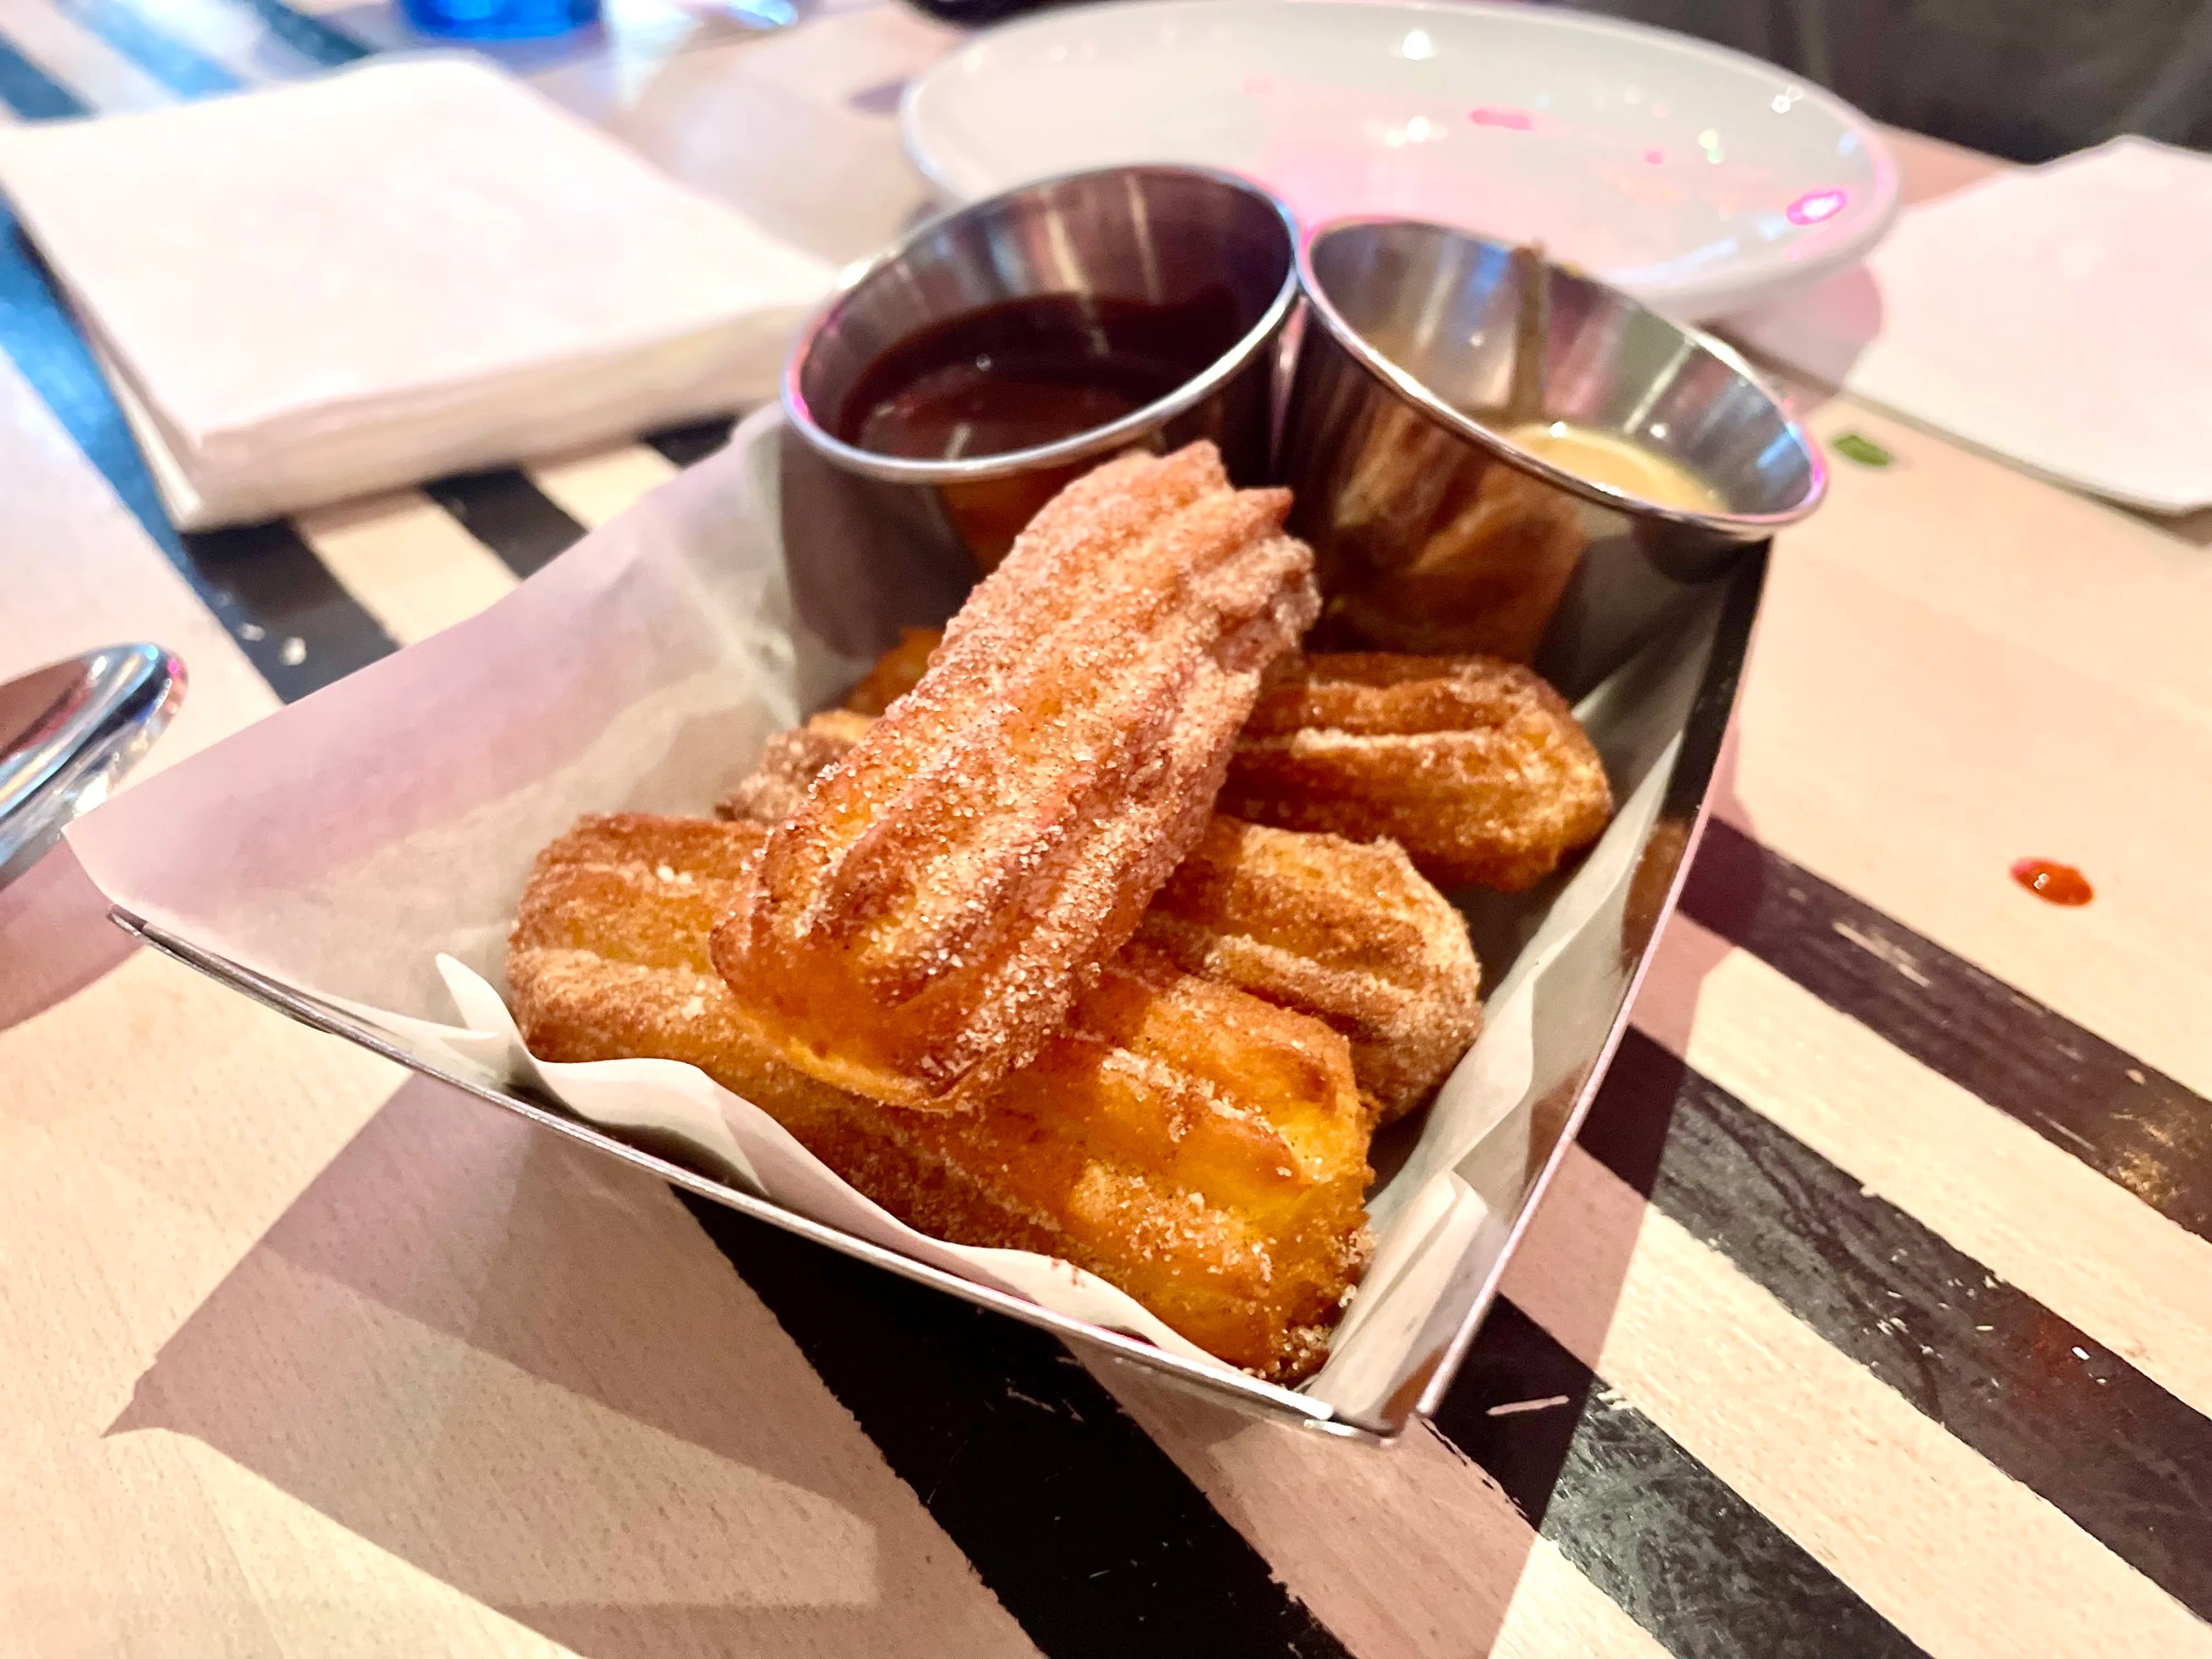 The churros are entirely gluten-free at Mission Taqueria, where the batter is made from rice flour, potato starch and eggs.